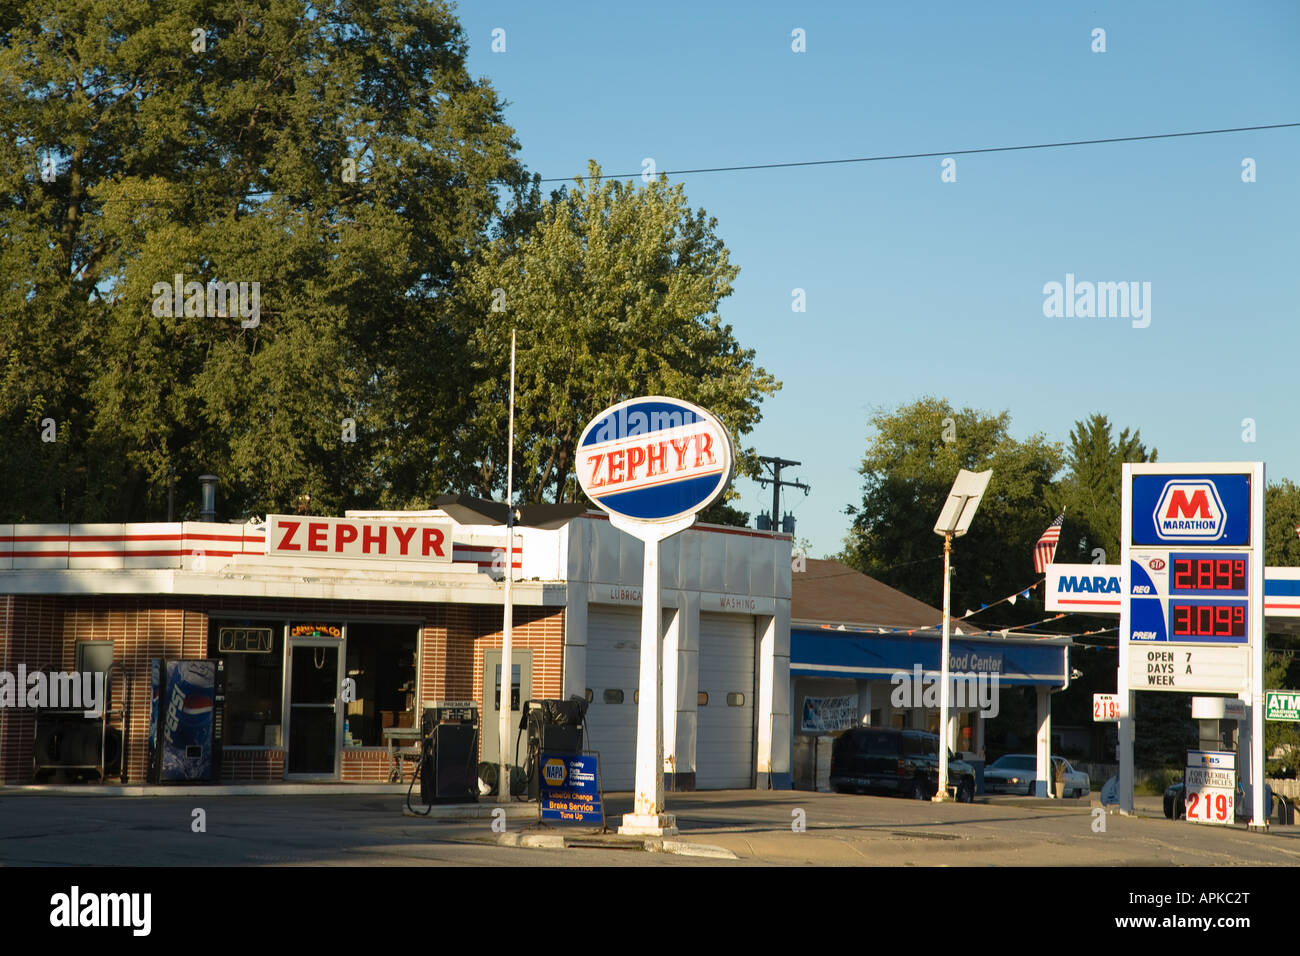 ILLINOIS Dixon Signs for Zephyr and Marathon gas stations along road in small town price signs for gasoline Stock Photo